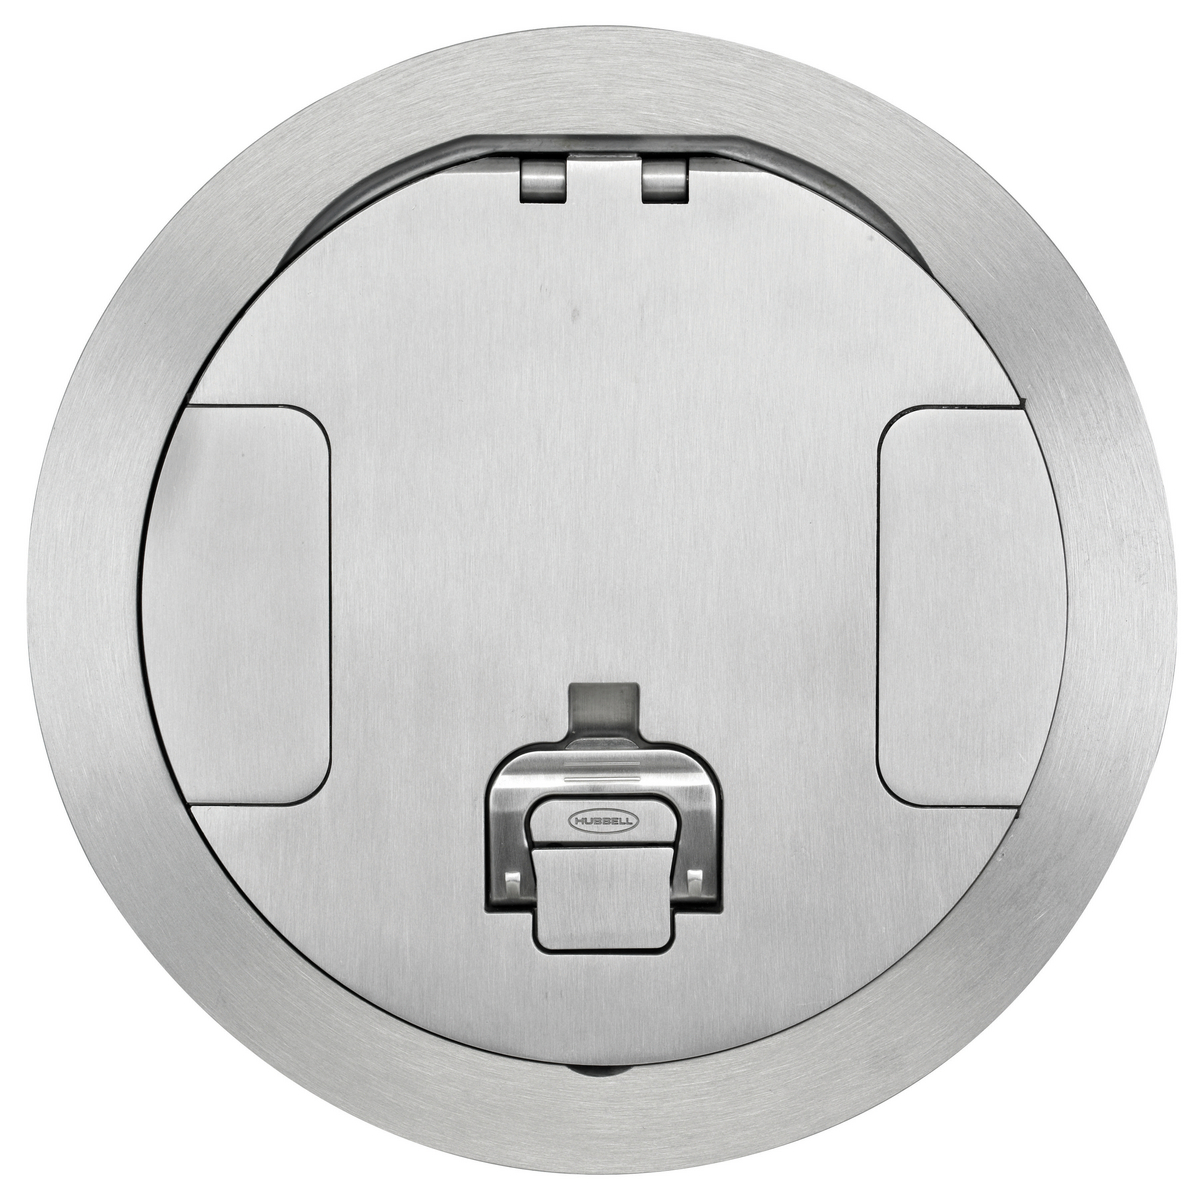 Details about   HUBBELL Round Floor Box S1R FB 4 Cover CFBS1R4CVRALU Brushed Aluminum 